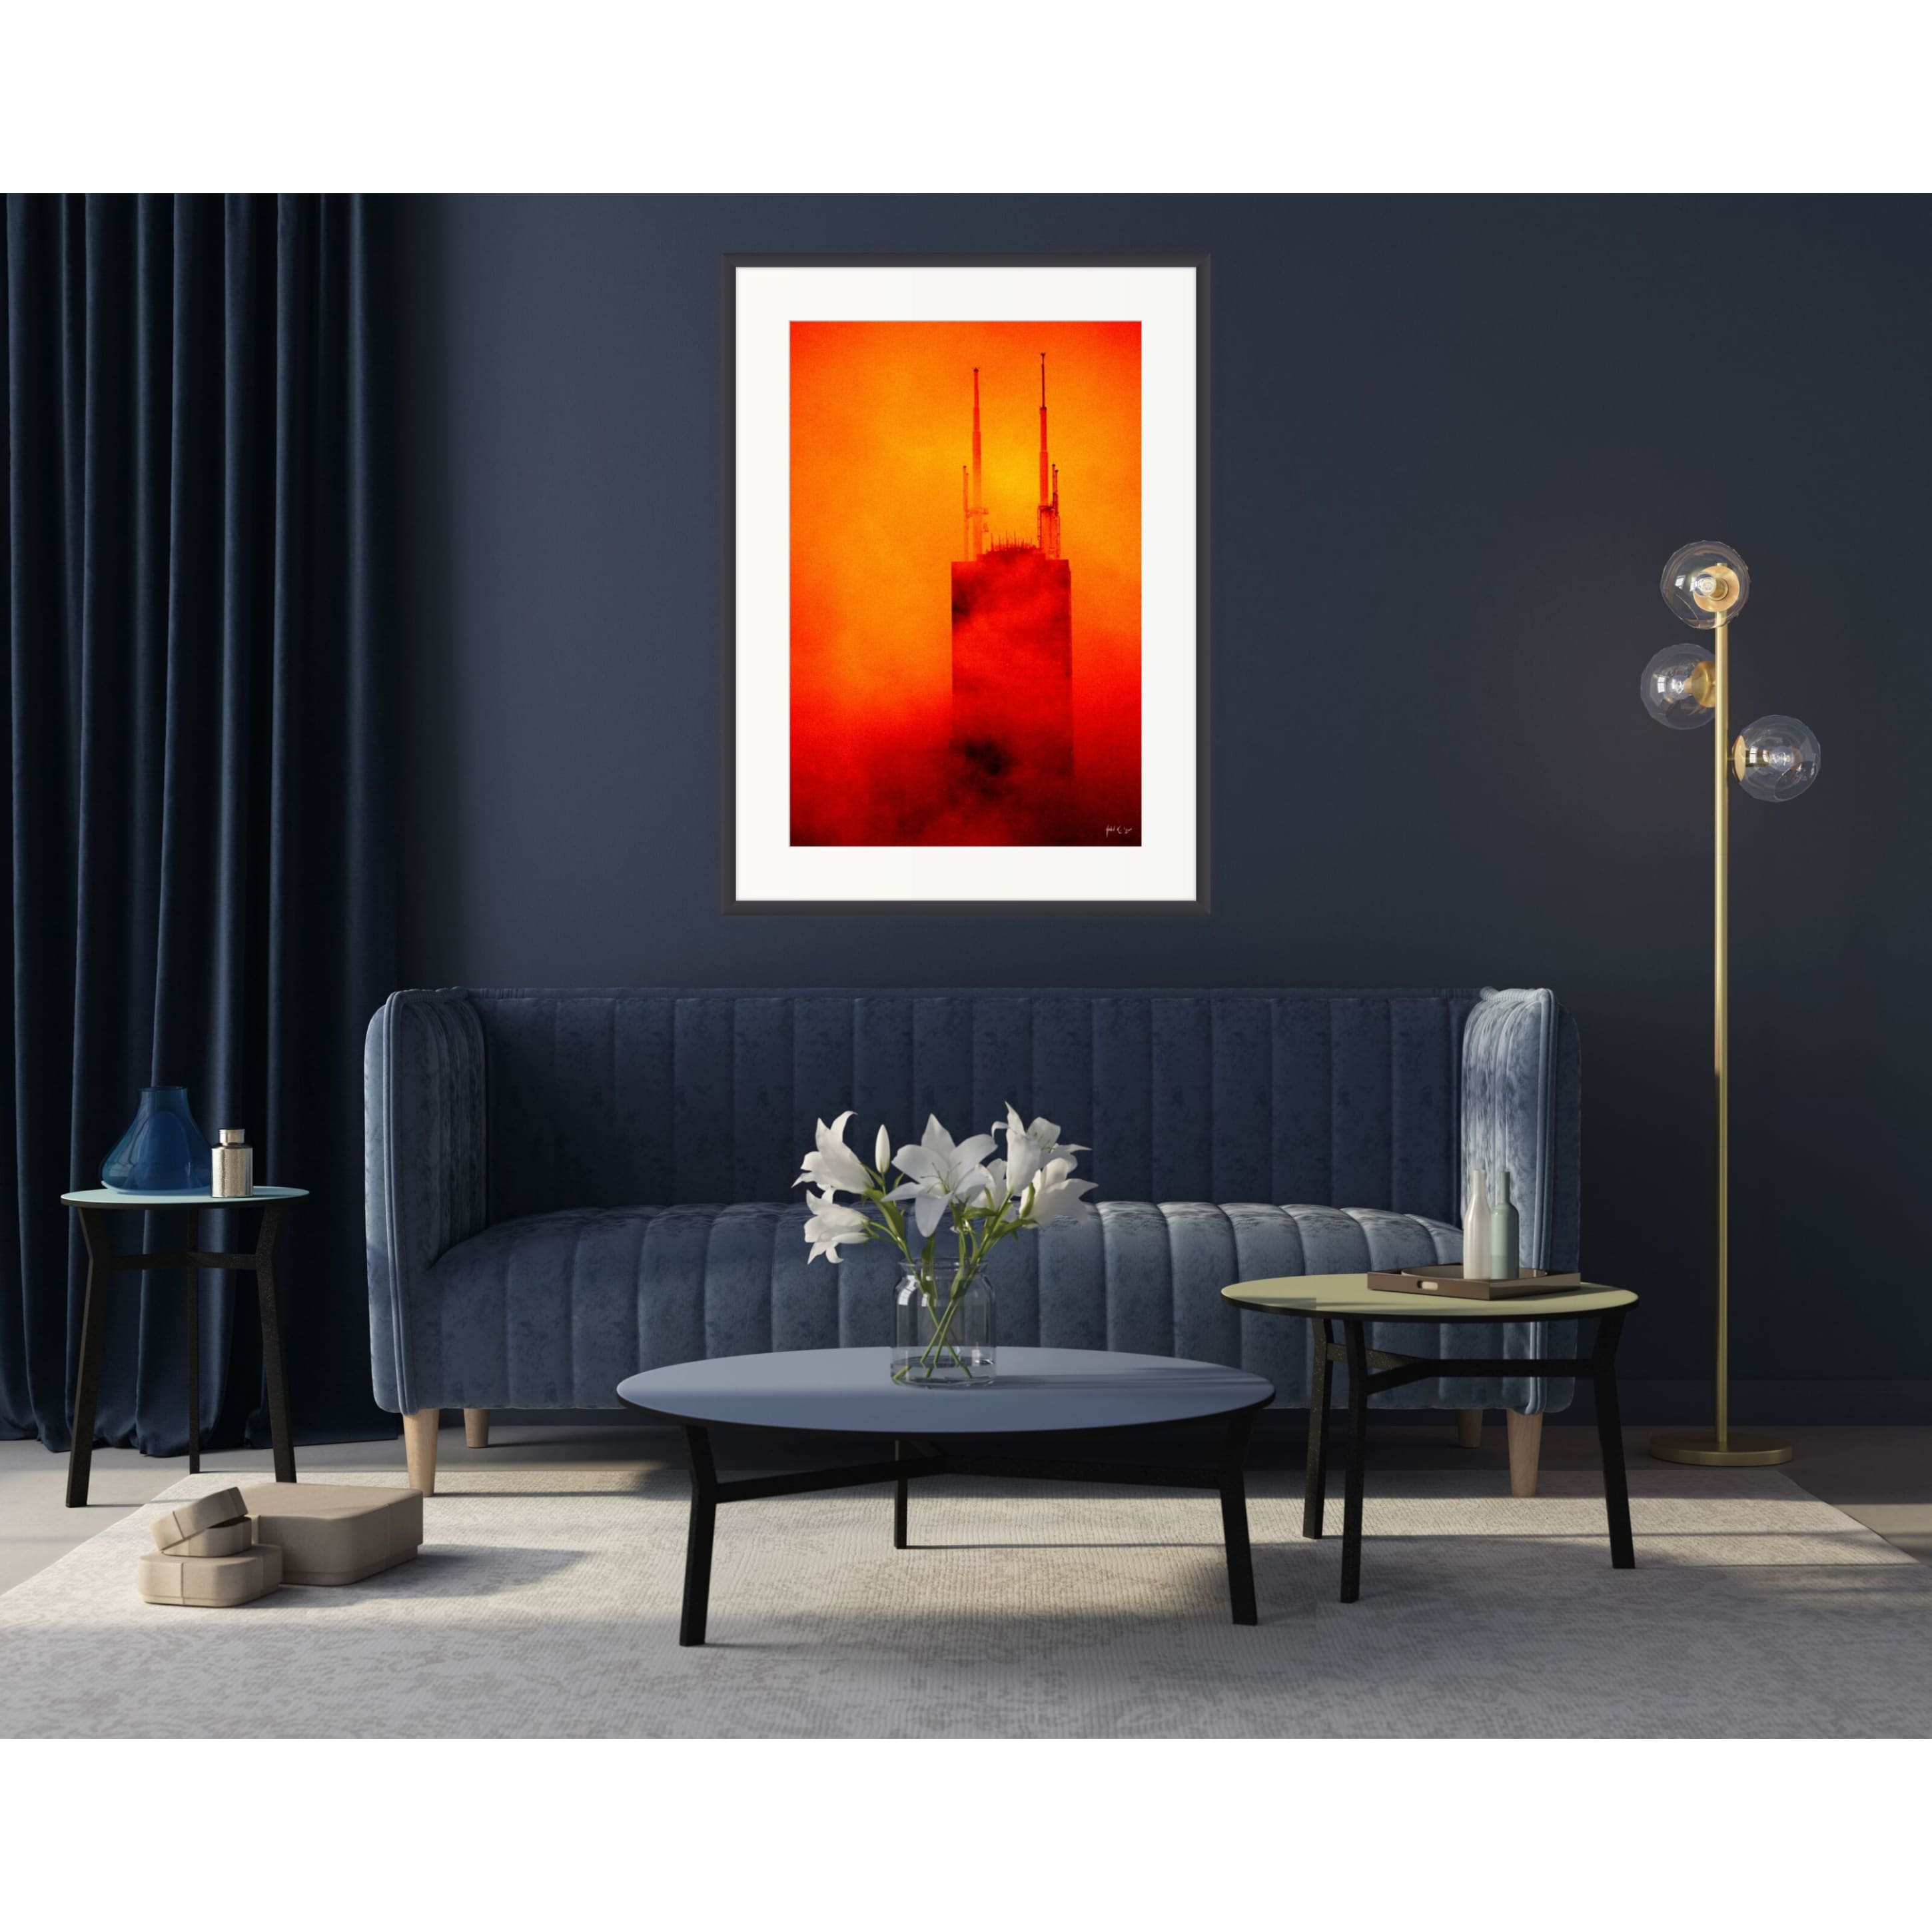 Sears Tower Chicago Fine Art Photographic Print and Acrylic 